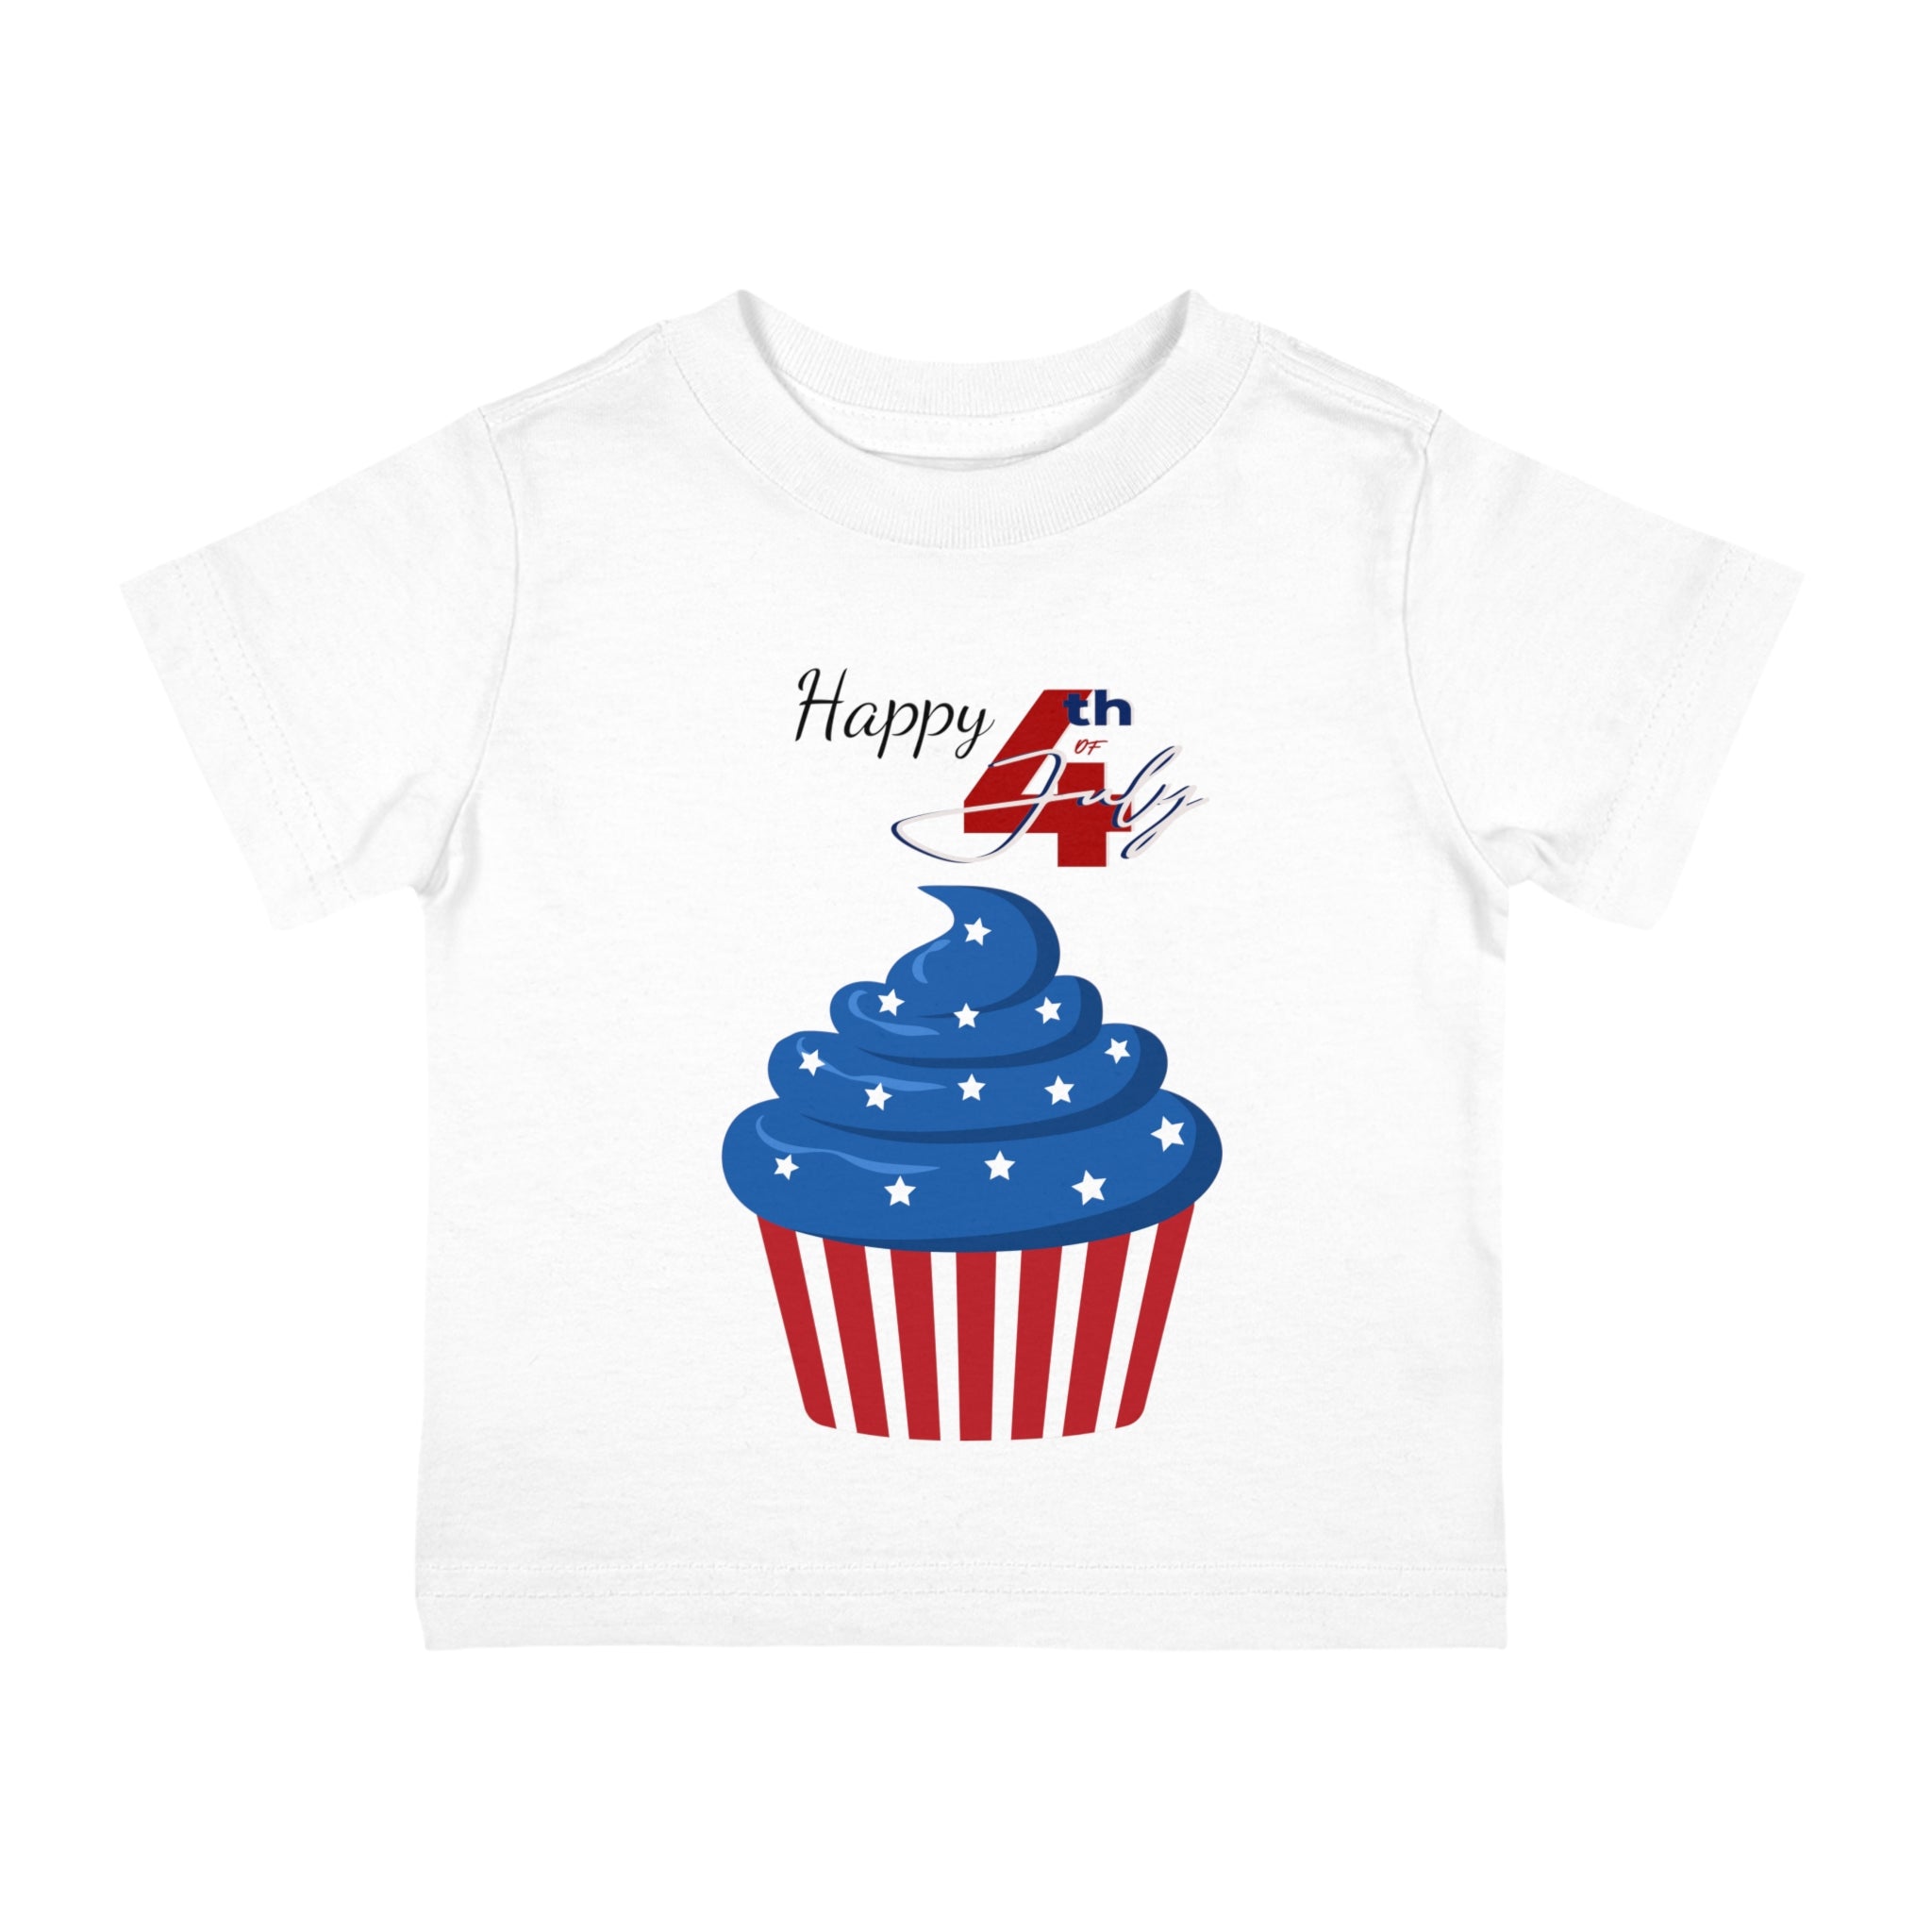 Happy 4th of July Cupcake Infant Shirt, Baby Tee, Infant Tee